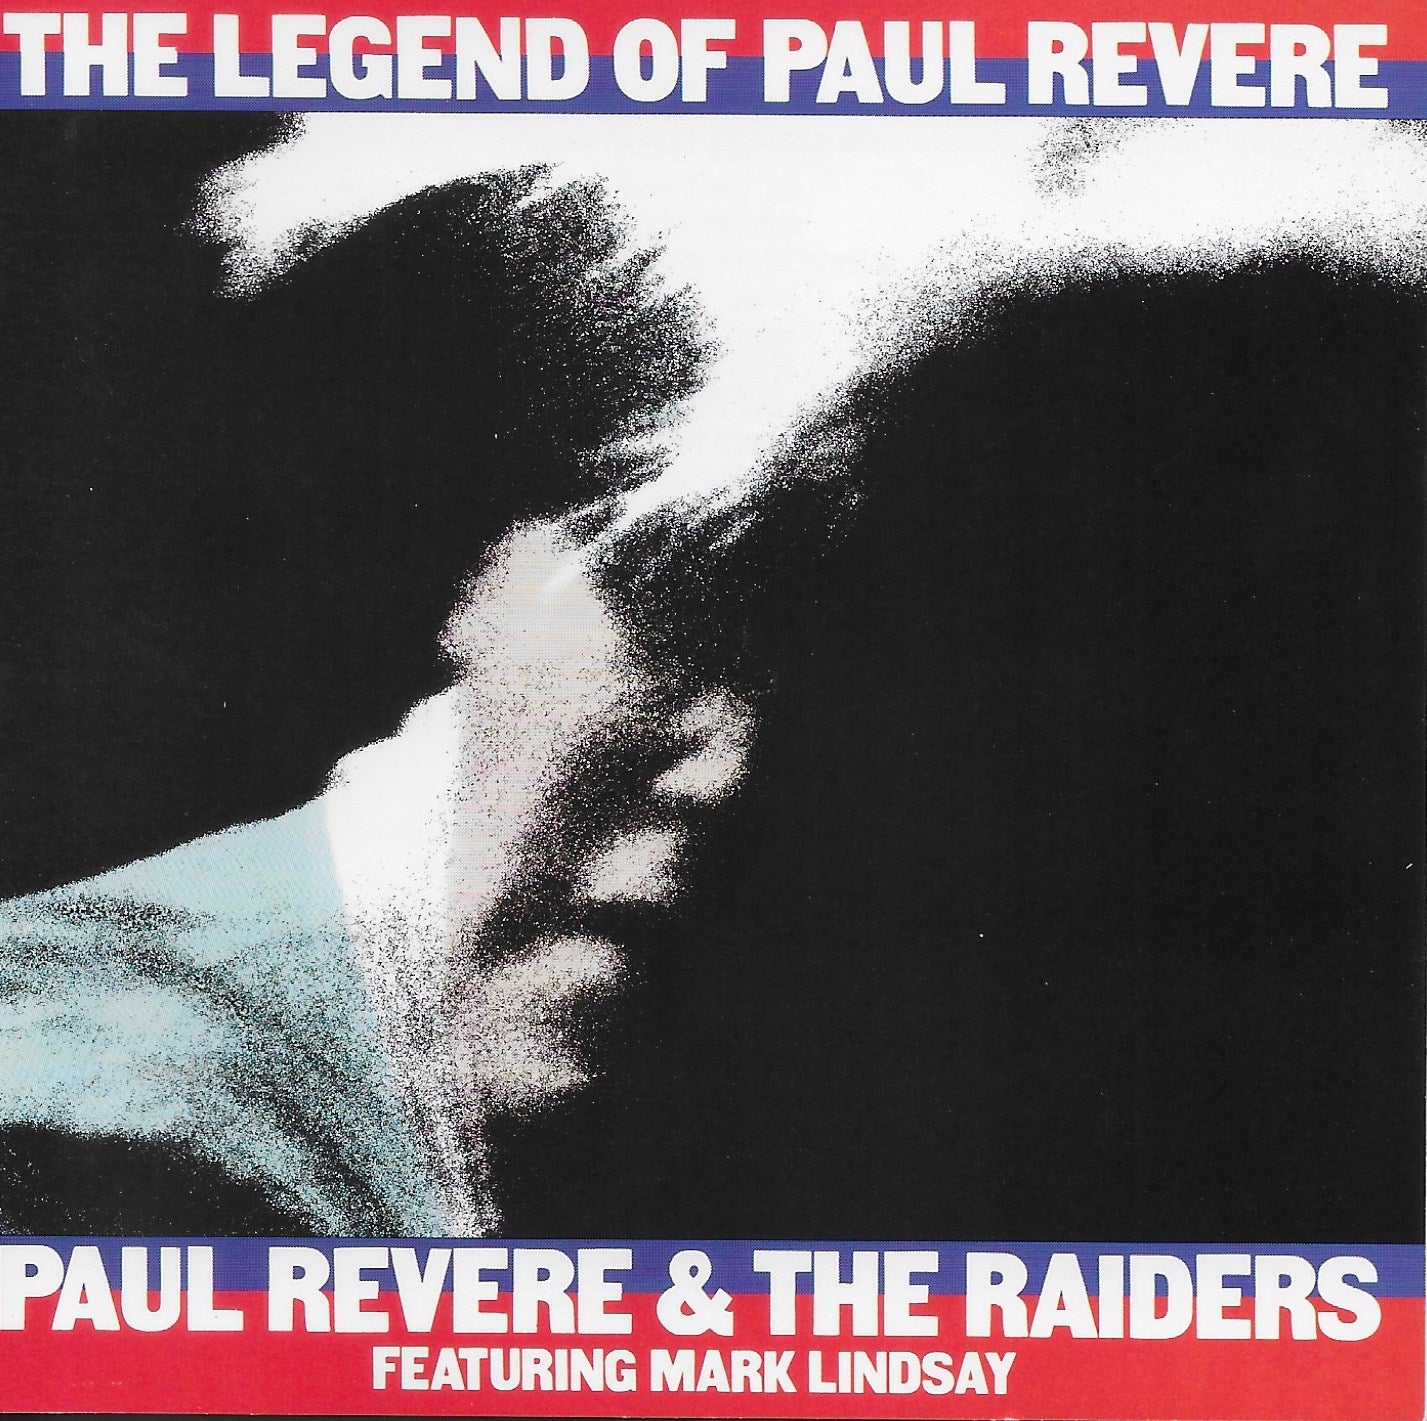 Legend of Paul Revere & The Raiders 3-CD Set (55 Songs) - Personally Autographed to YOU by Mark Lindsay